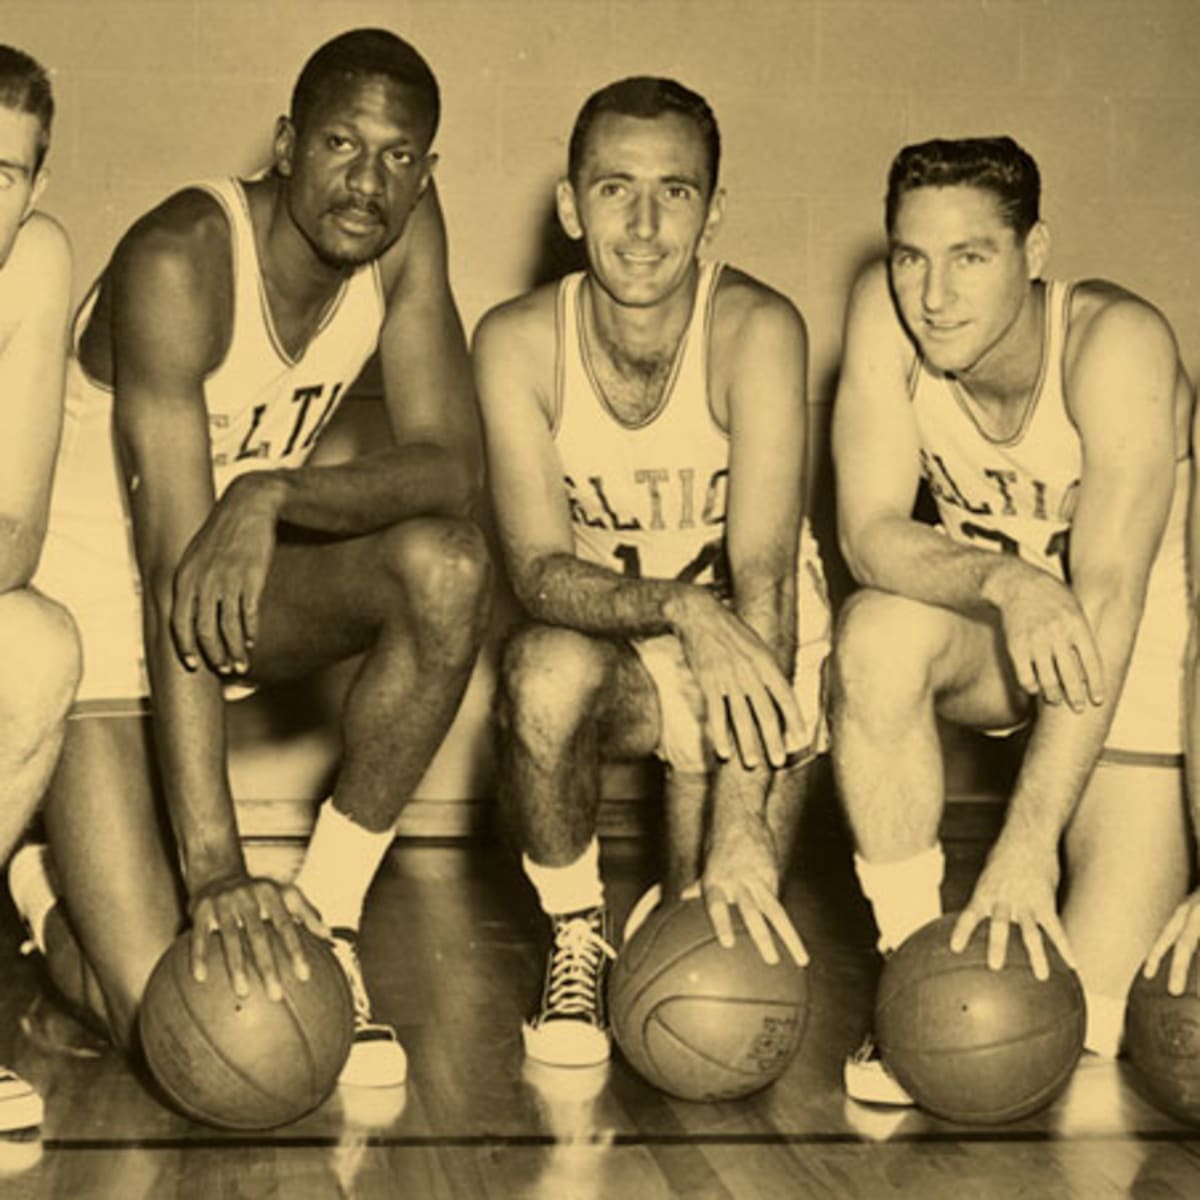 Bob Cousy: 10 things to know